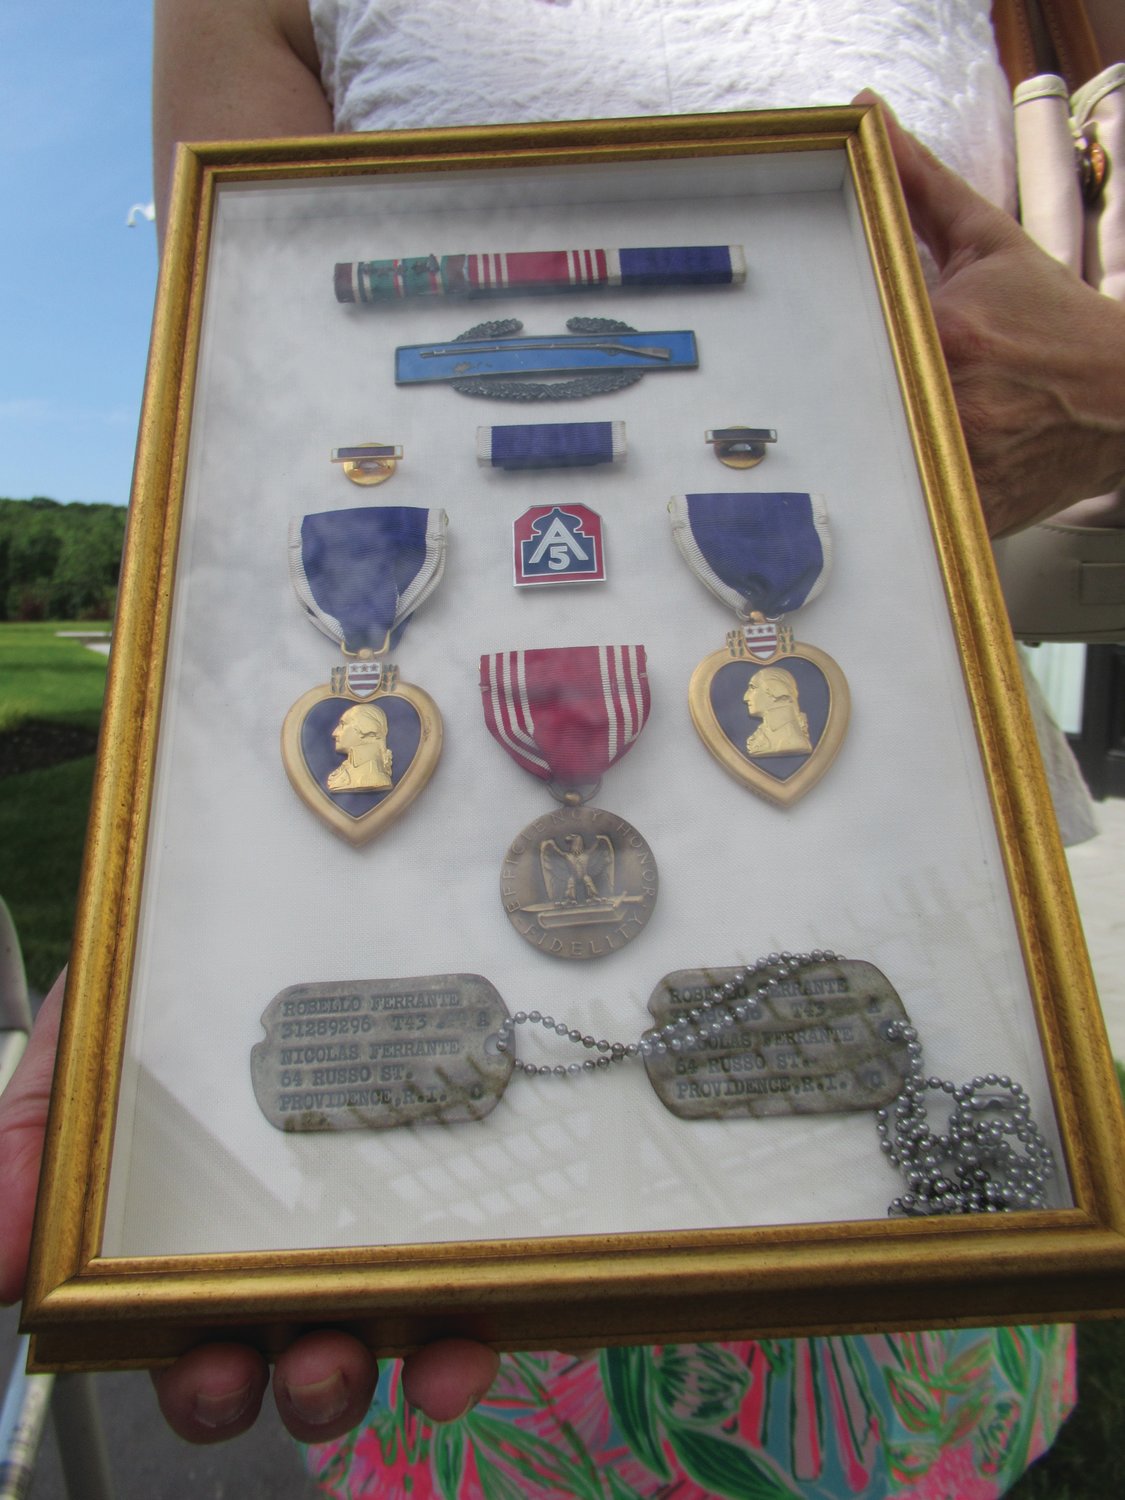 DISTINGUISHED DISPLAY: This is the framed collection of the 11 war medals Rebello Ferrante received during his 4-year career in the U.S. Army during World War II.